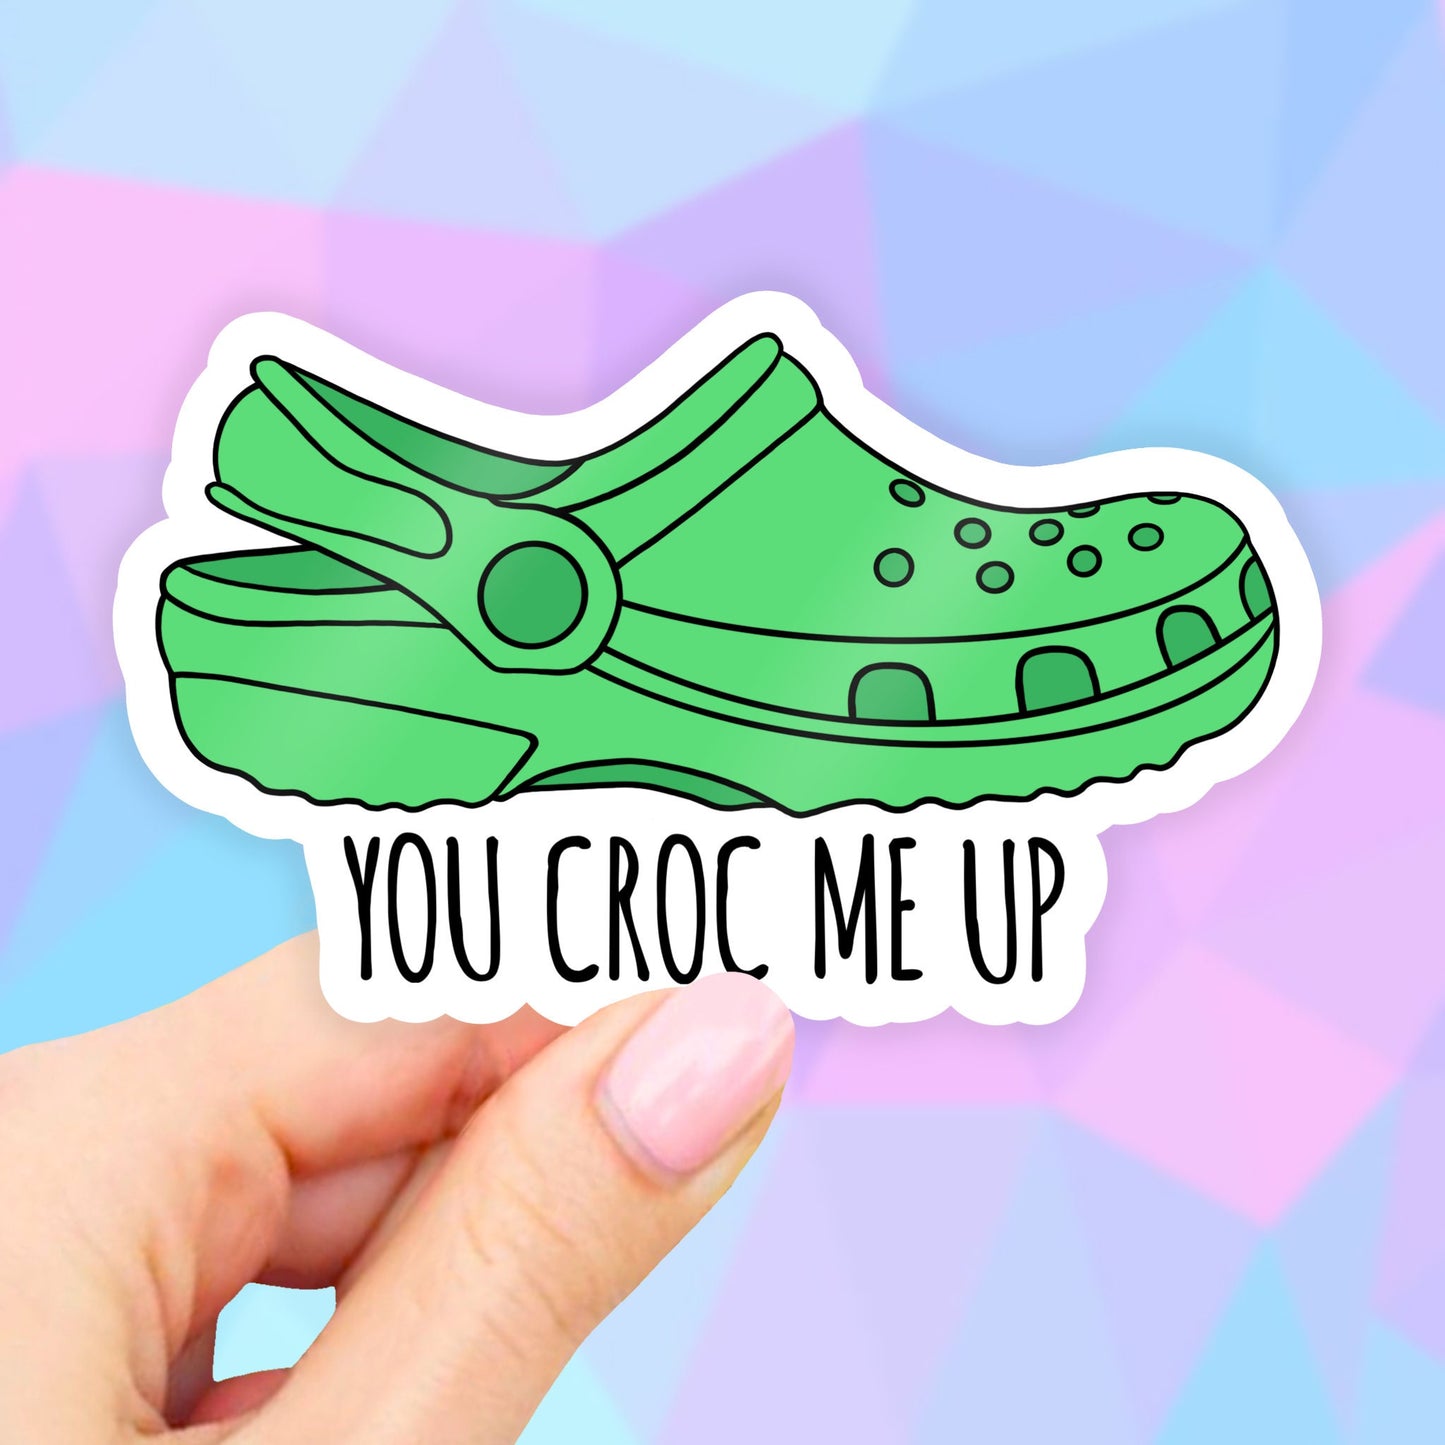 Green You Croc Me Up Sticker, green Croc Sticker, VSCO Stickers, Croc Stickers, Laptop Stickers, Crocs decal, Water bottle stickers, decals